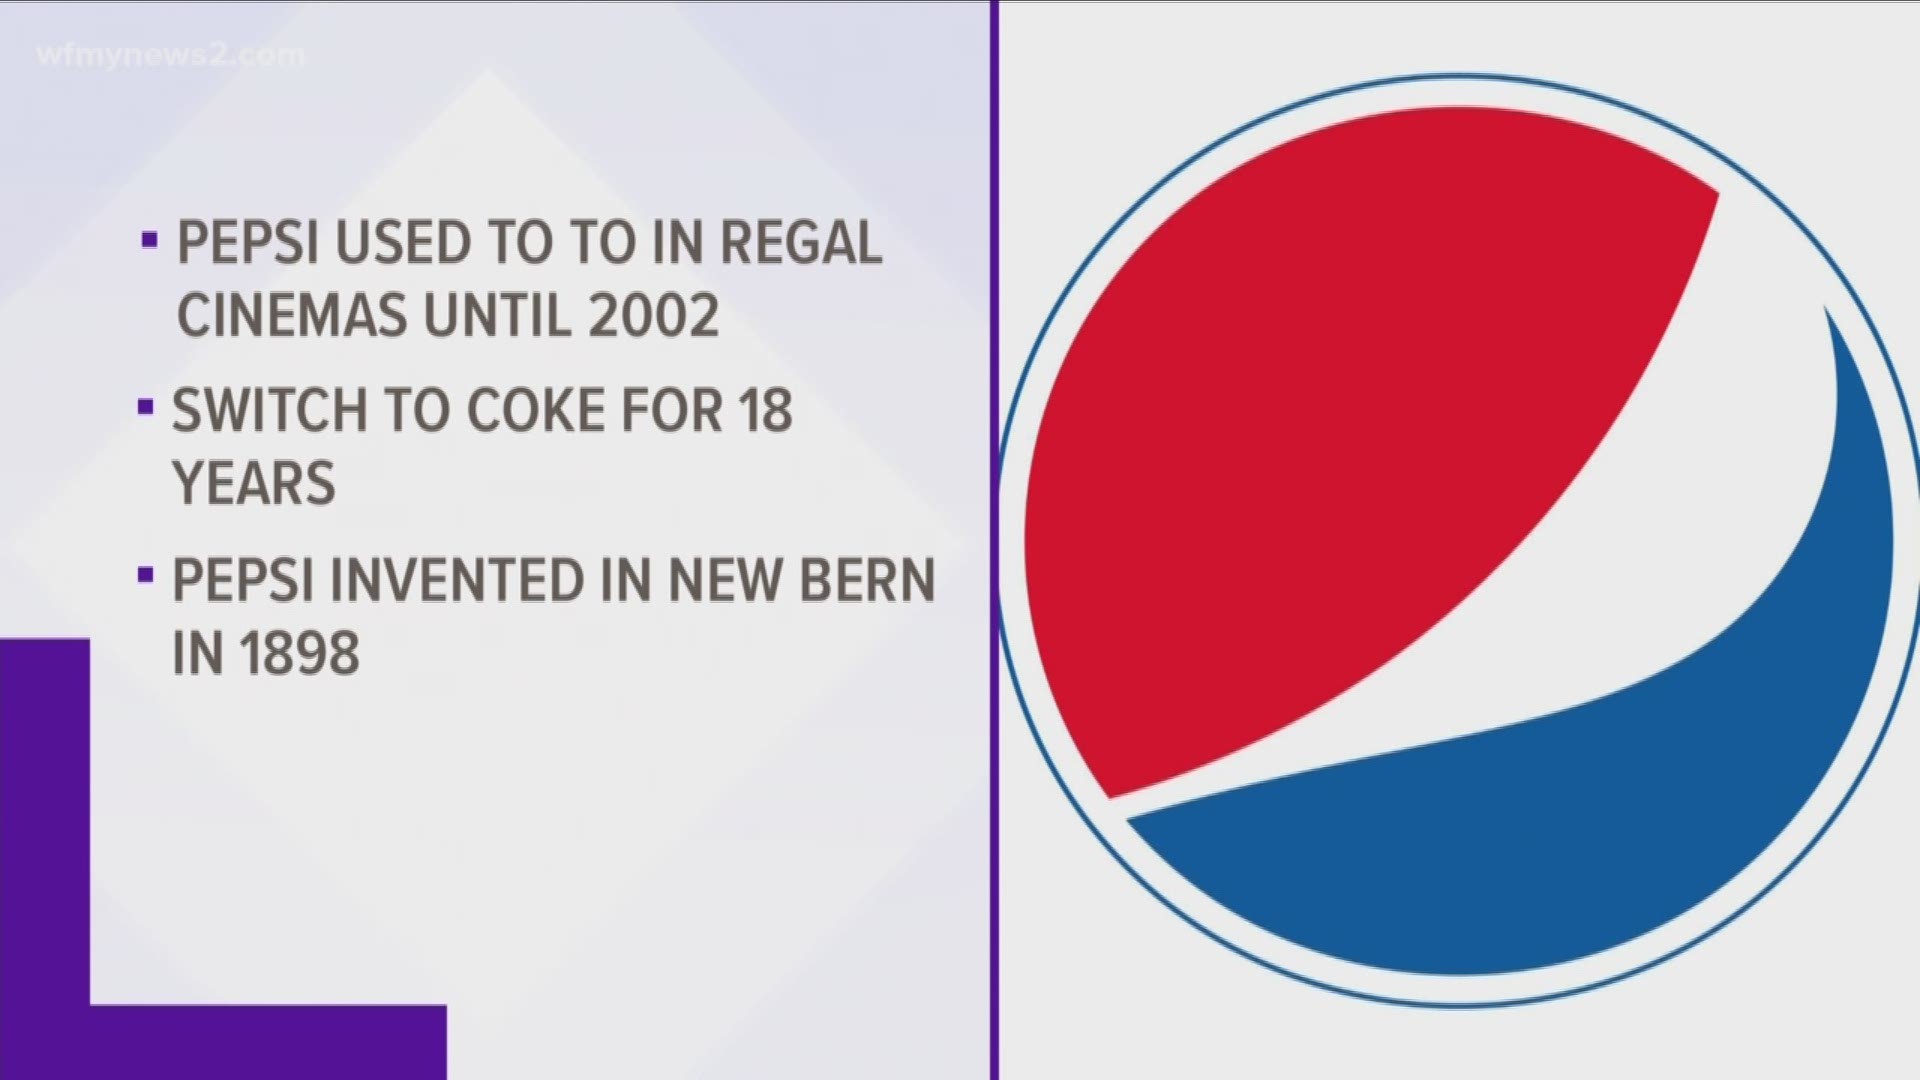 The companies announced over Twitter that Regal would start carrying Pepsi products in its theaters starting Spring 2020, after a breakup that lasted 18 years.